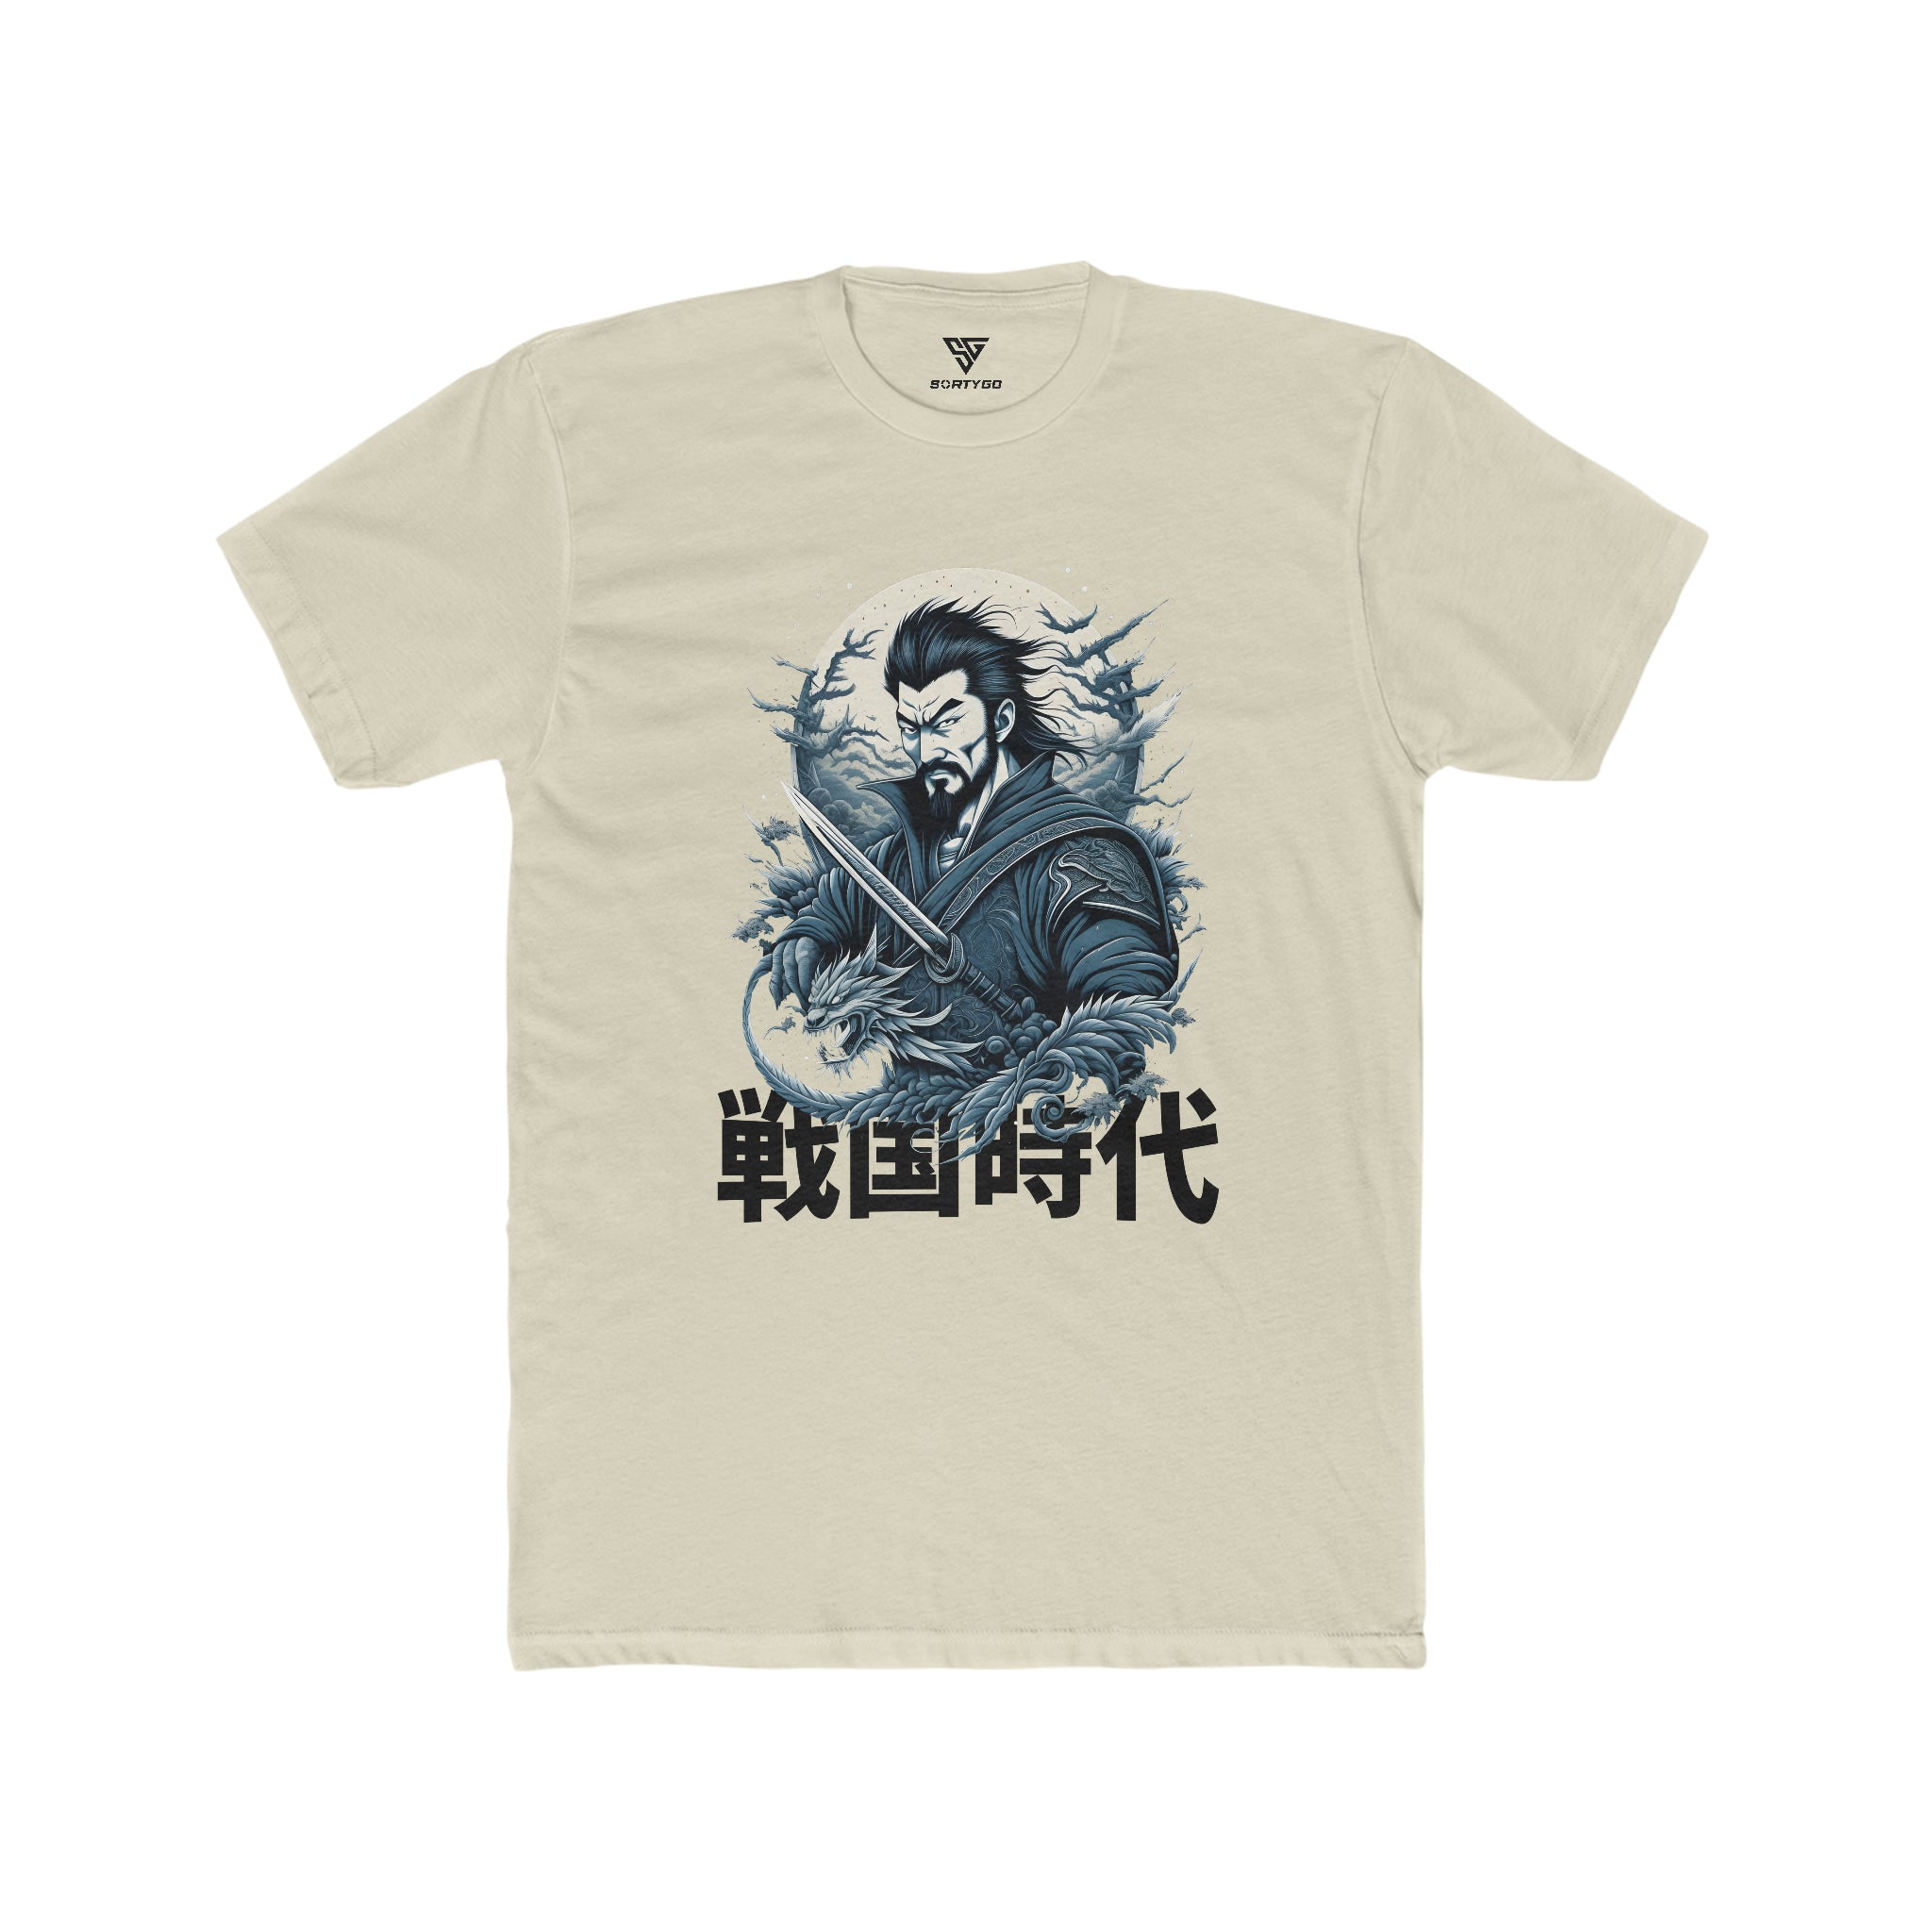 SORTYGO - Japanese Warrior Men Fitted T-Shirt in Solid Cream